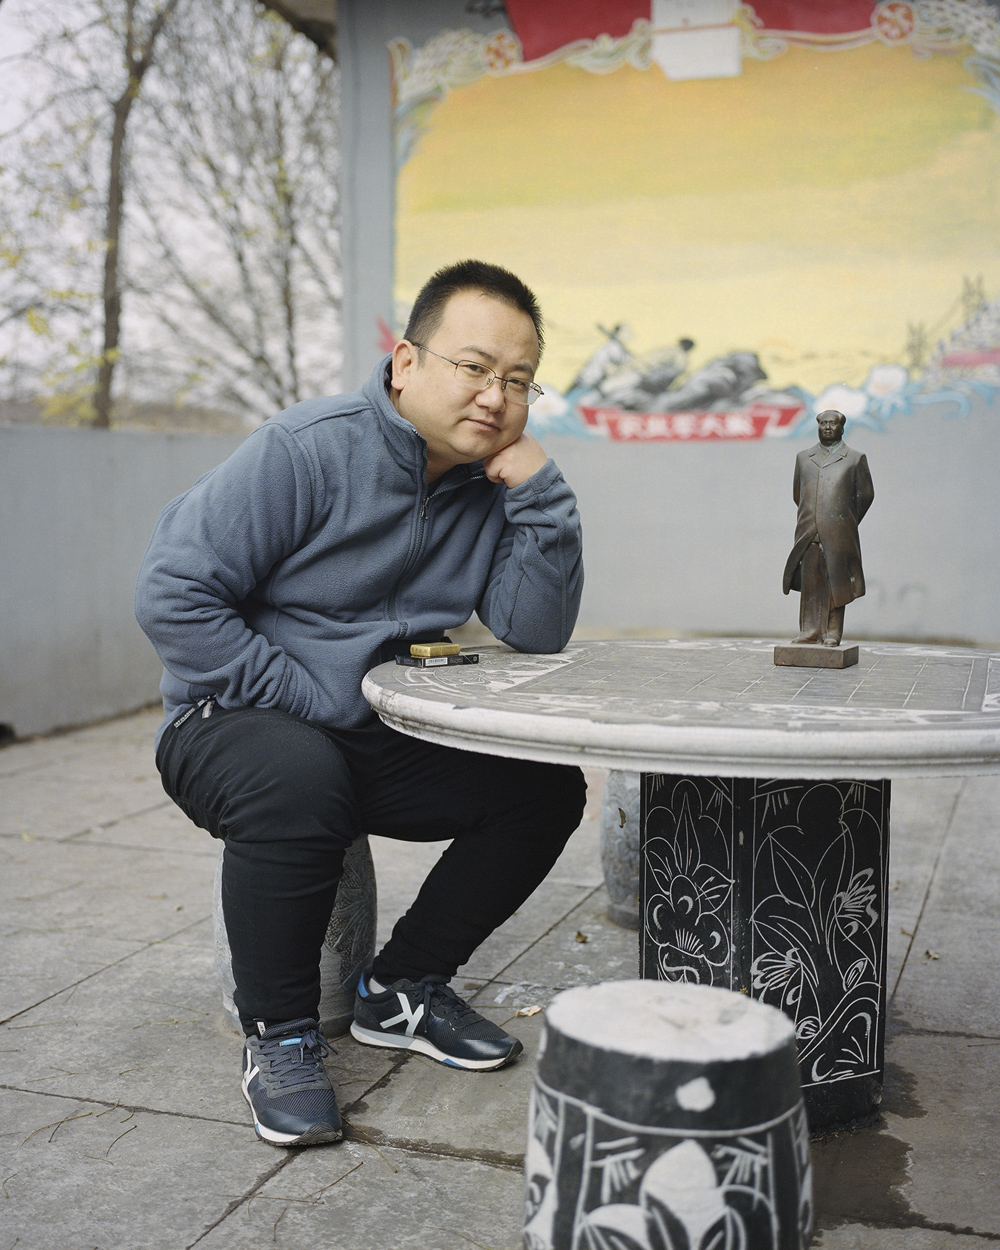 Zhao Mingxing poses for a photo with a Mao statue at his museum in Dazhai Village, Shanxi province, Nov. 17, 2018. Shi Yangkun/Sixth Tone